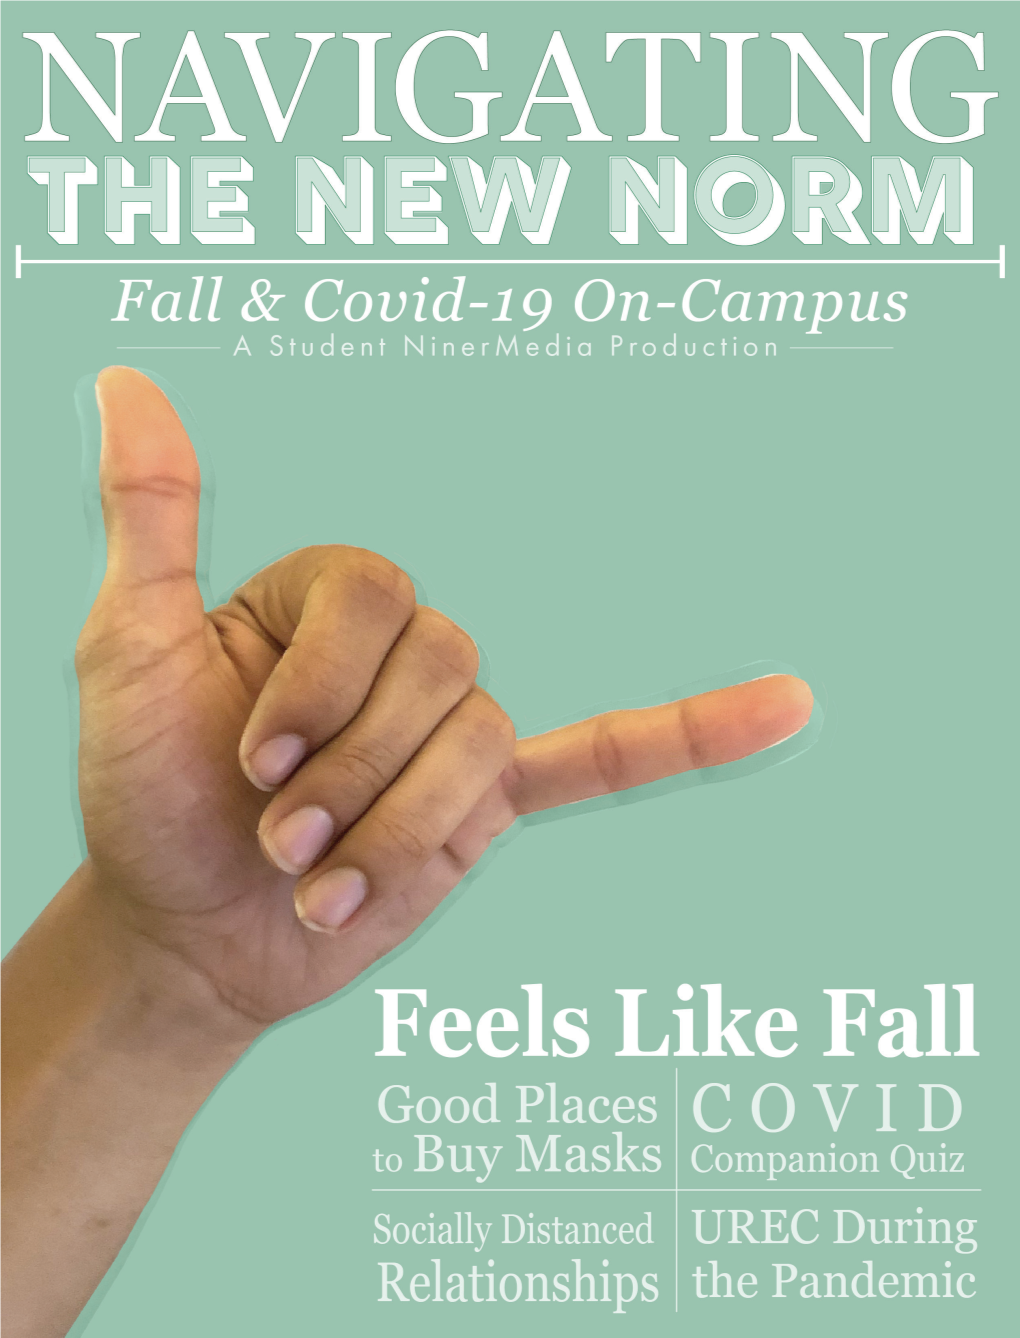 Navigating the New Norm TABLE of CONTENTS